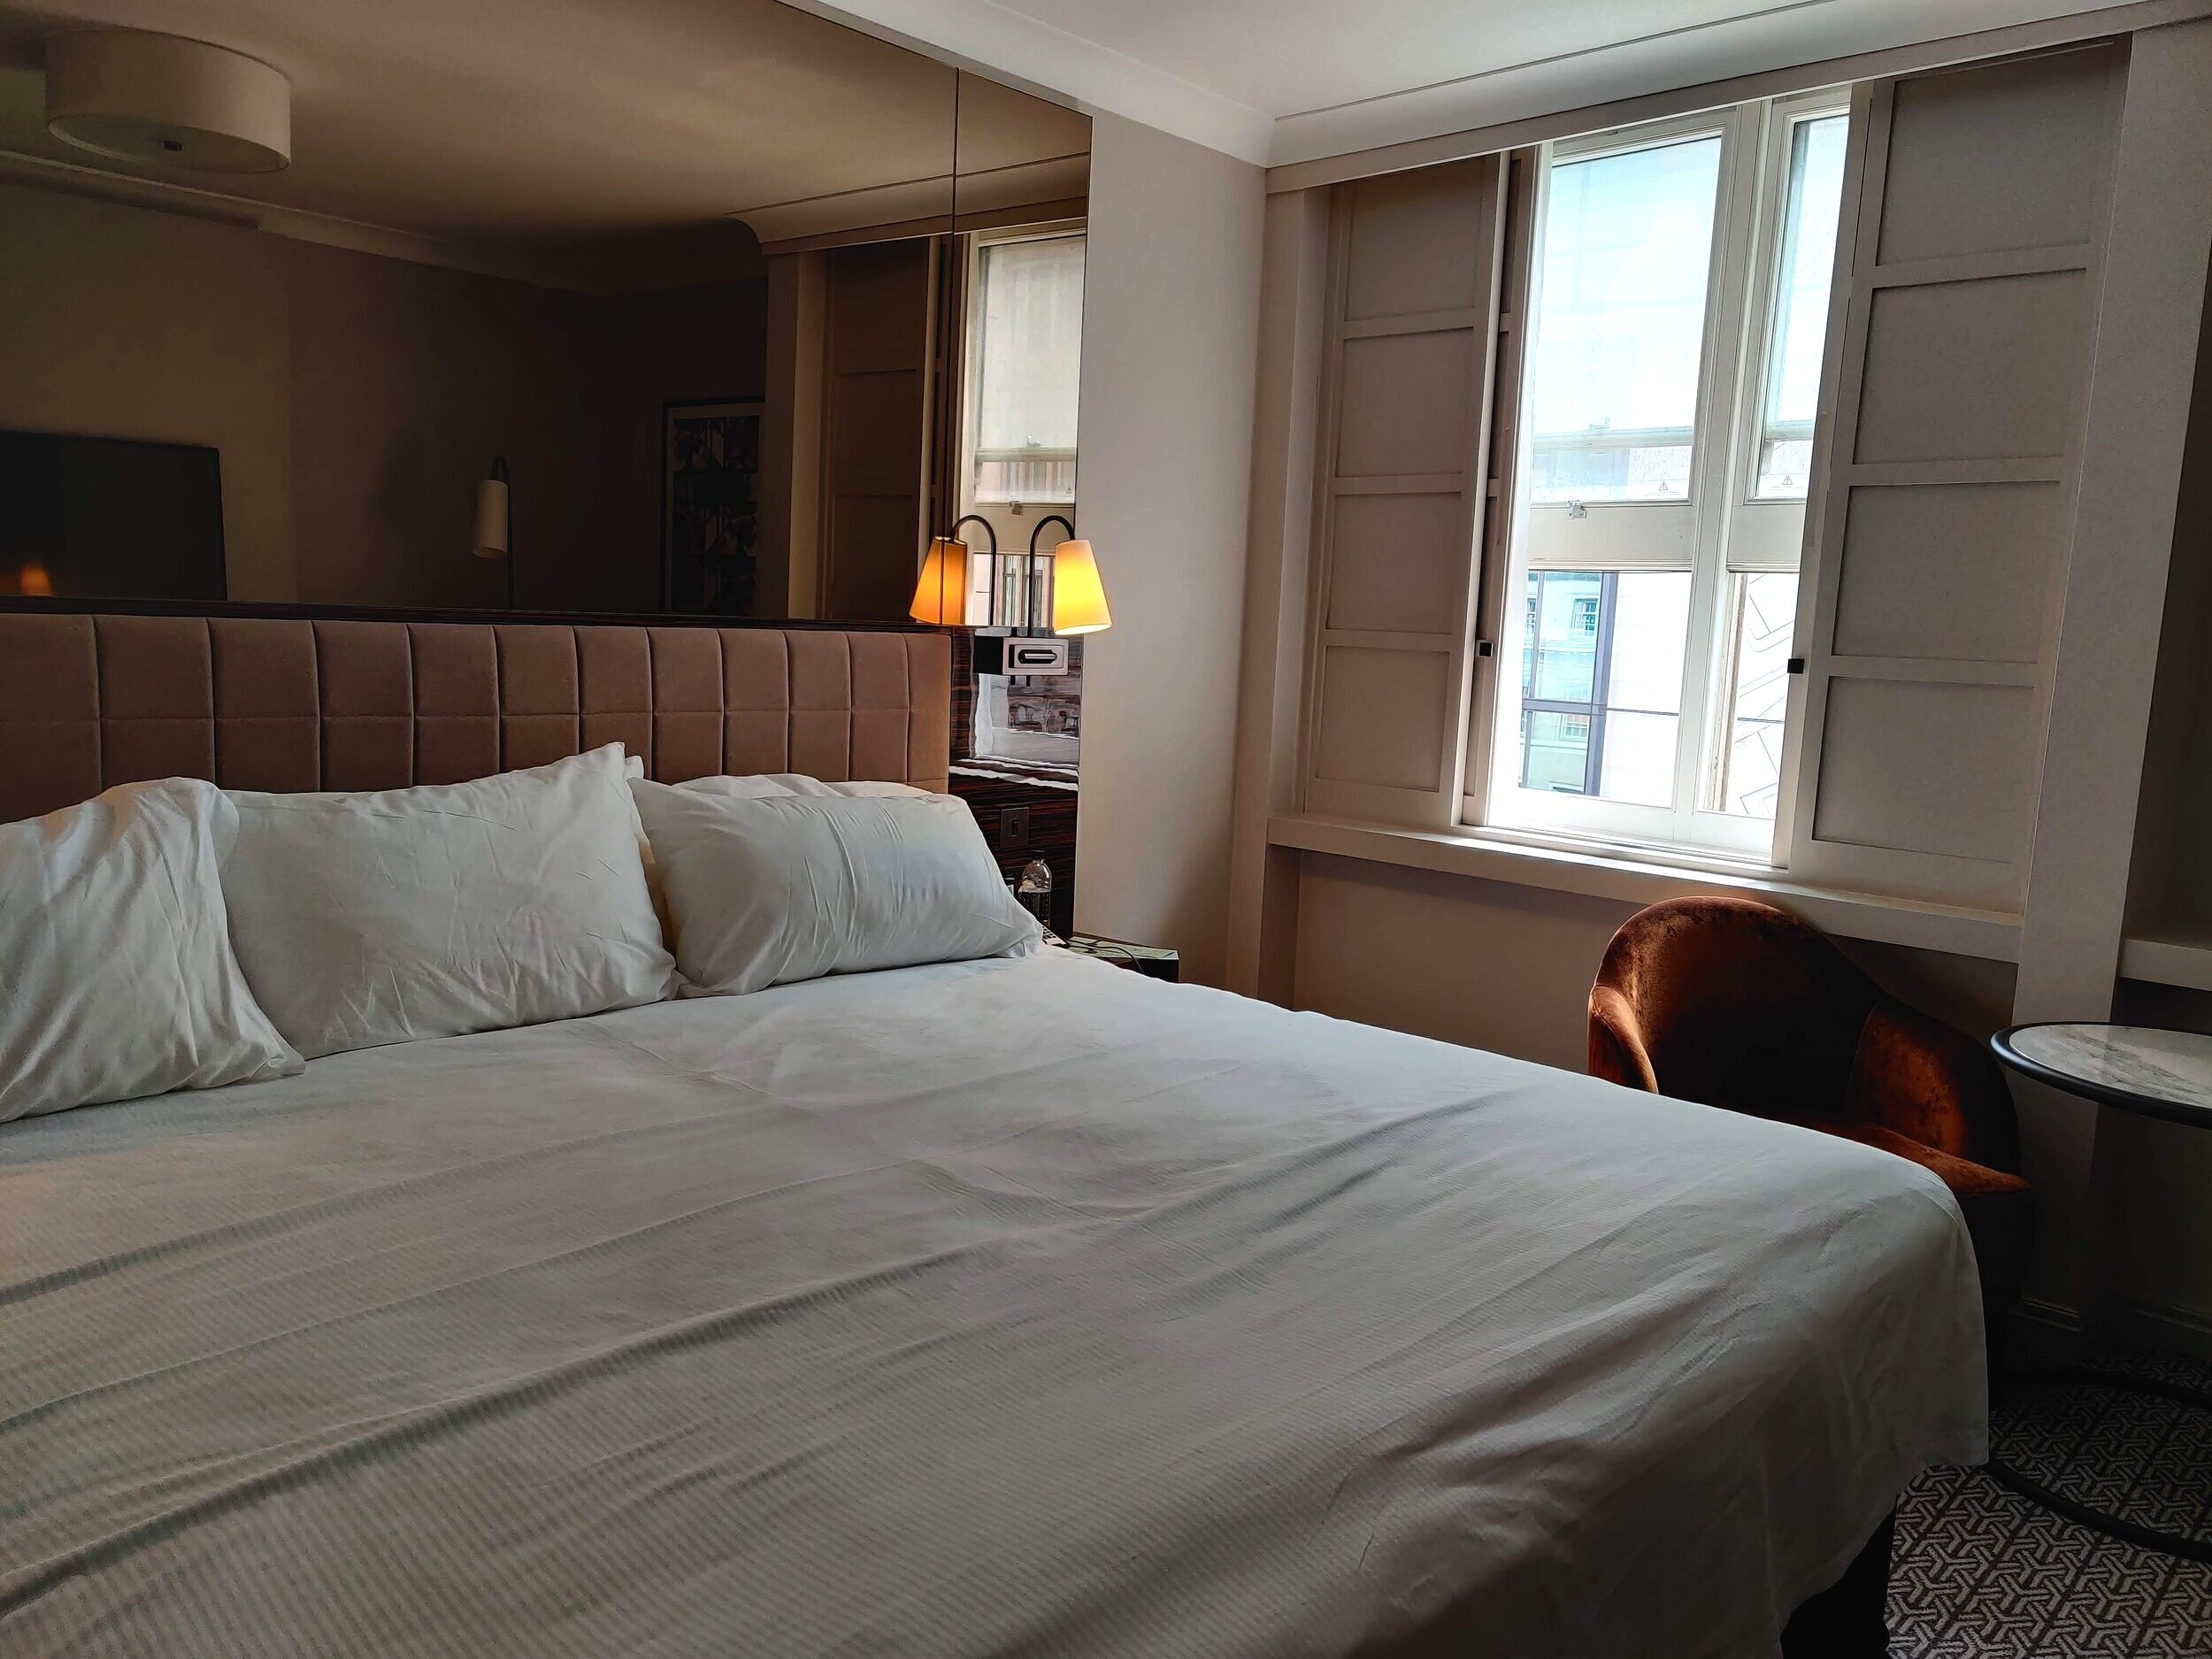 Strand Palace Hotel London Review